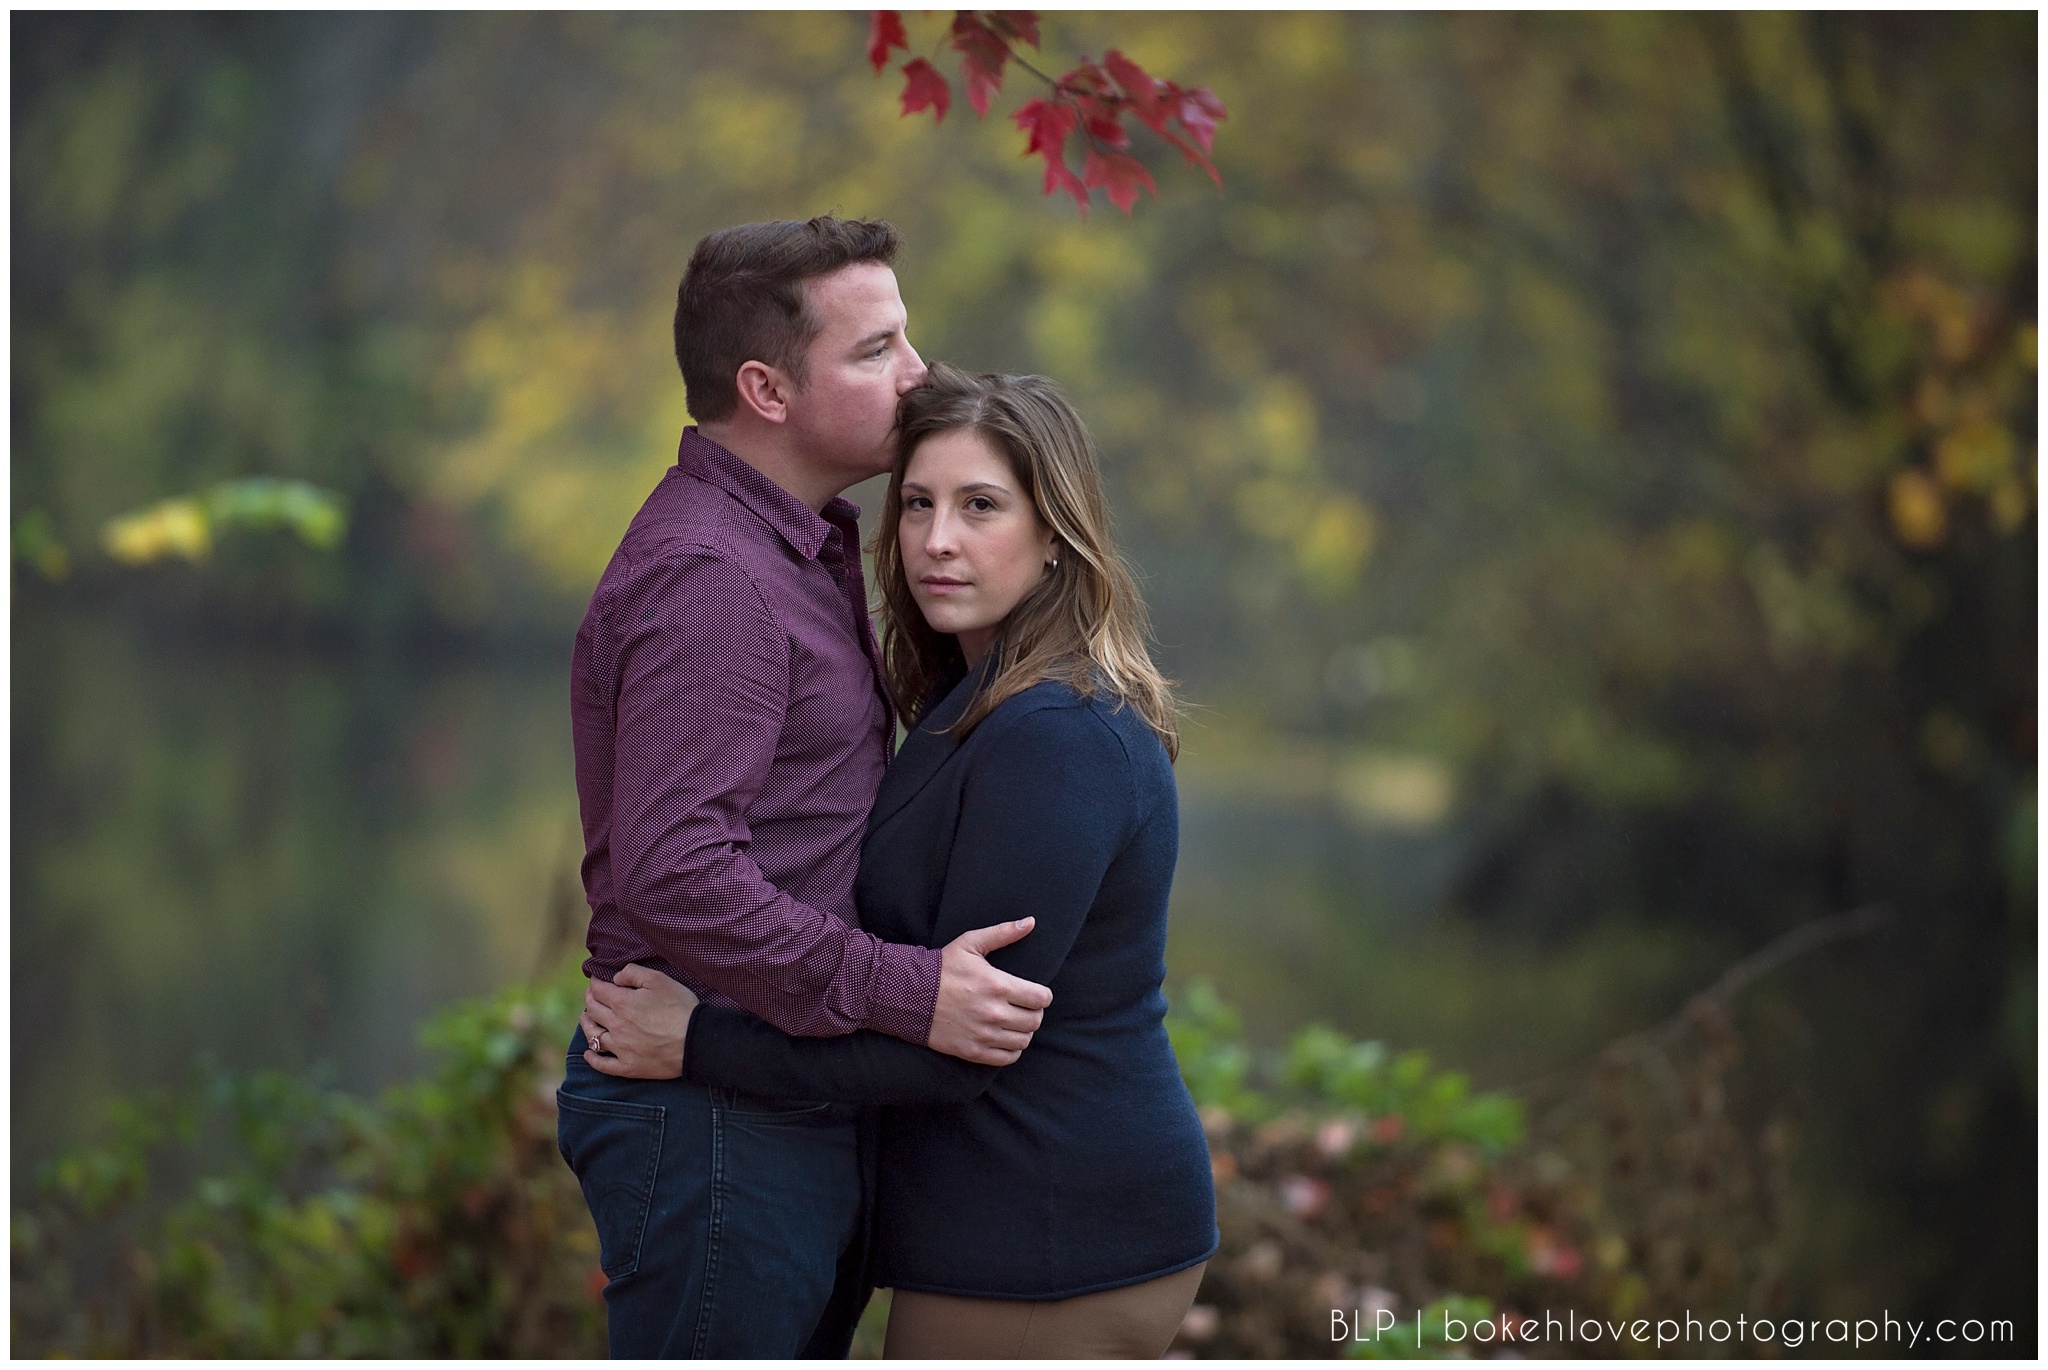 caffe galleria, lambertville, nj, engagement session, nj engagement, south jersey bride, nj bride, new jersey bride, fall engagement, november engagement, caffeegallerianj, getting married, future mr and mrs, soon to be married, bokeh love photography